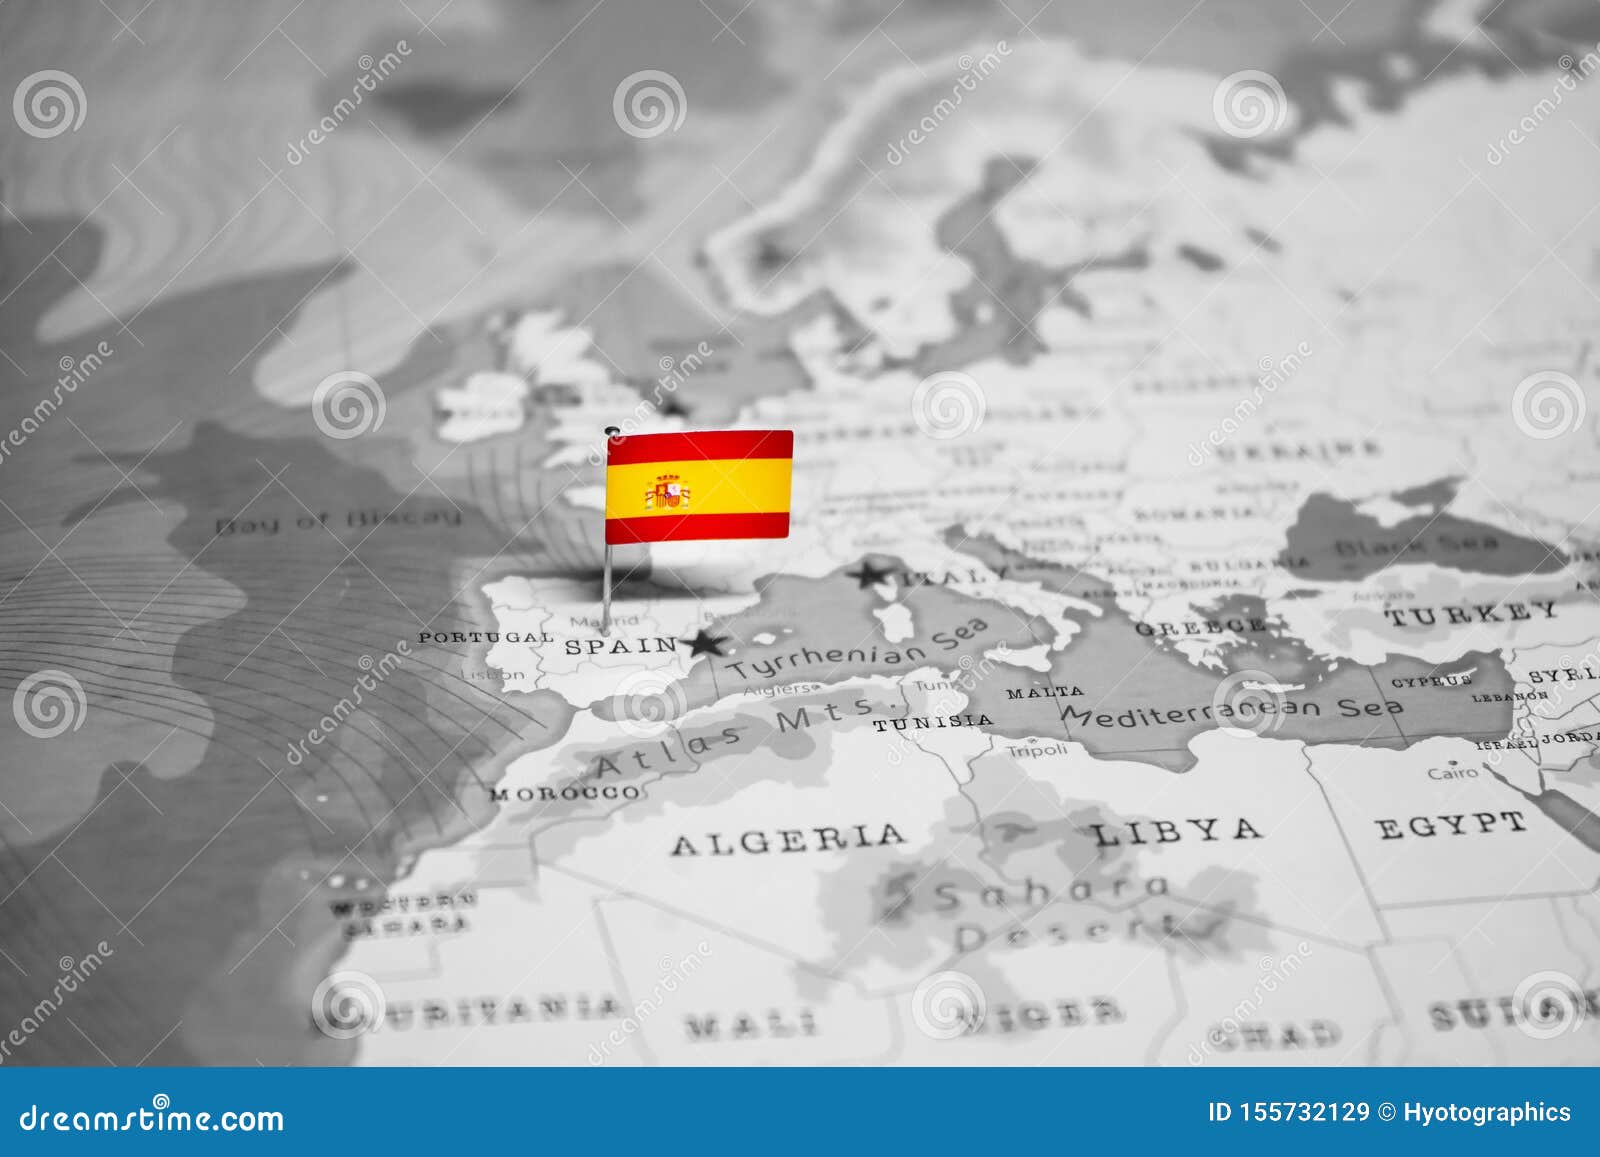 The Flag Of Spain In The World Map Stock Image Image Of Country Education 155732129